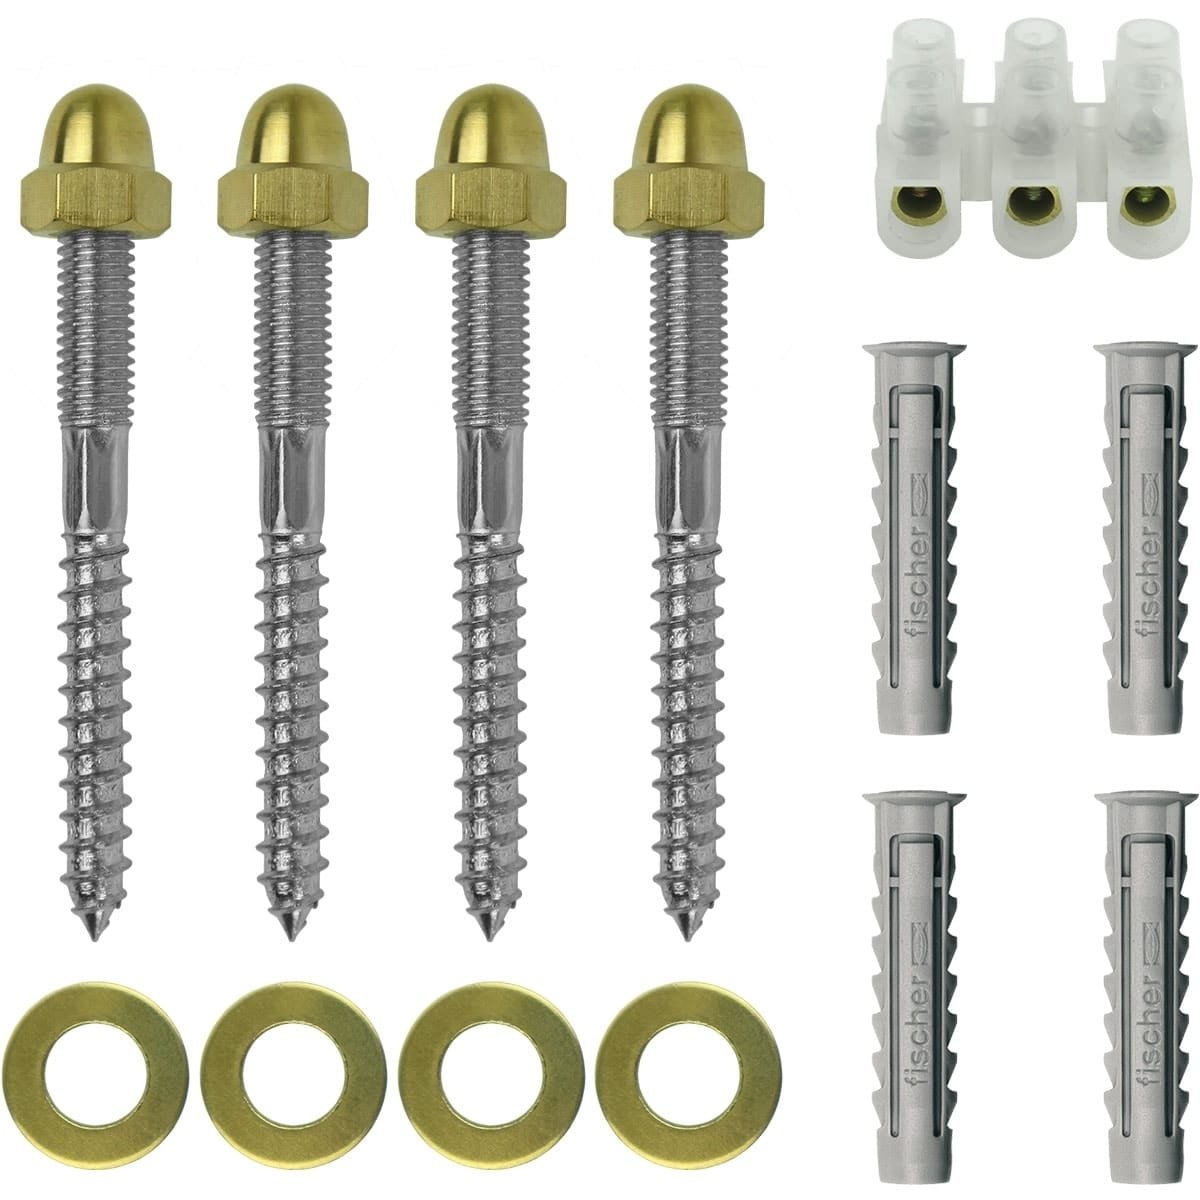 Outdoor Lighting Mounting Material Mounting set M8 stick screws - 4-pieces